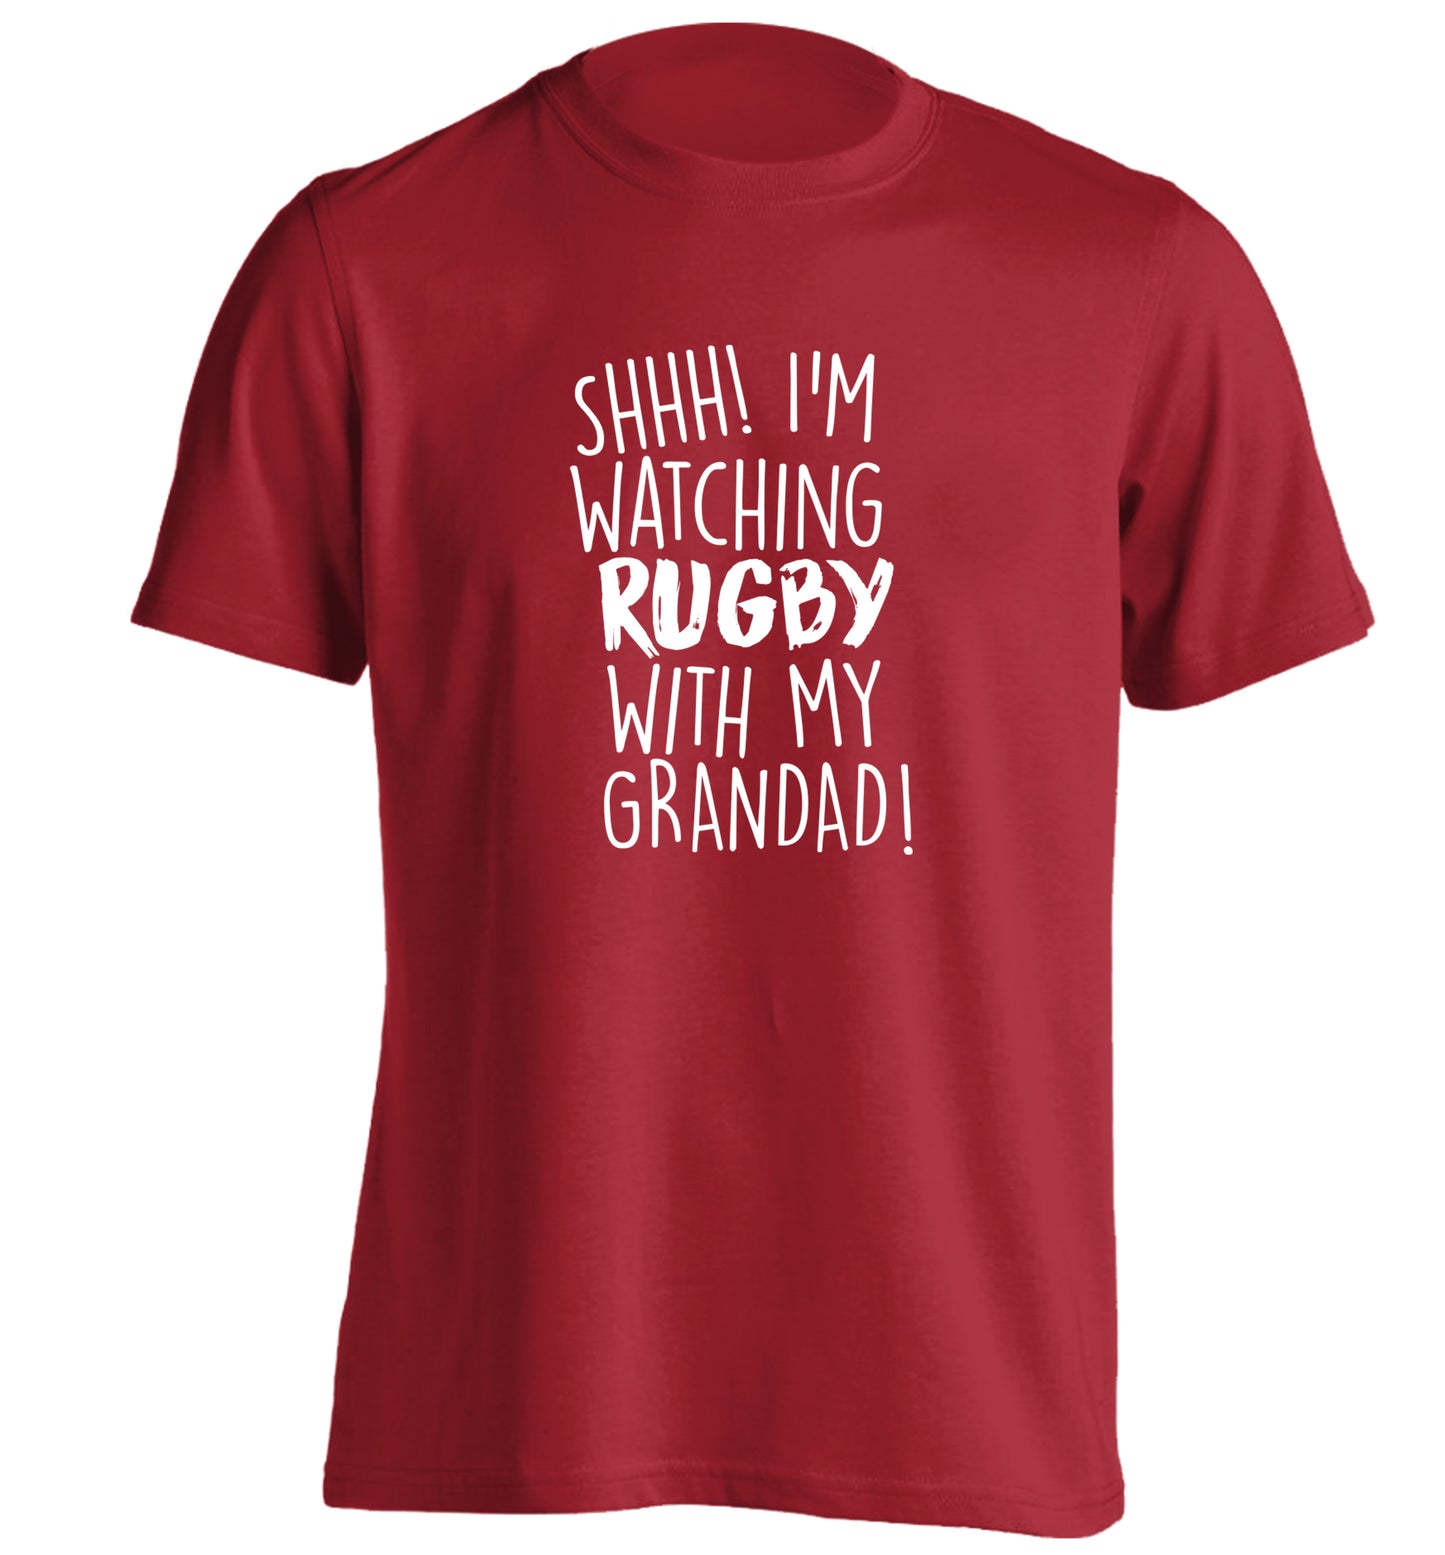 Shh I'm watching rugby with my grandaughter adults unisex red Tshirt 2XL